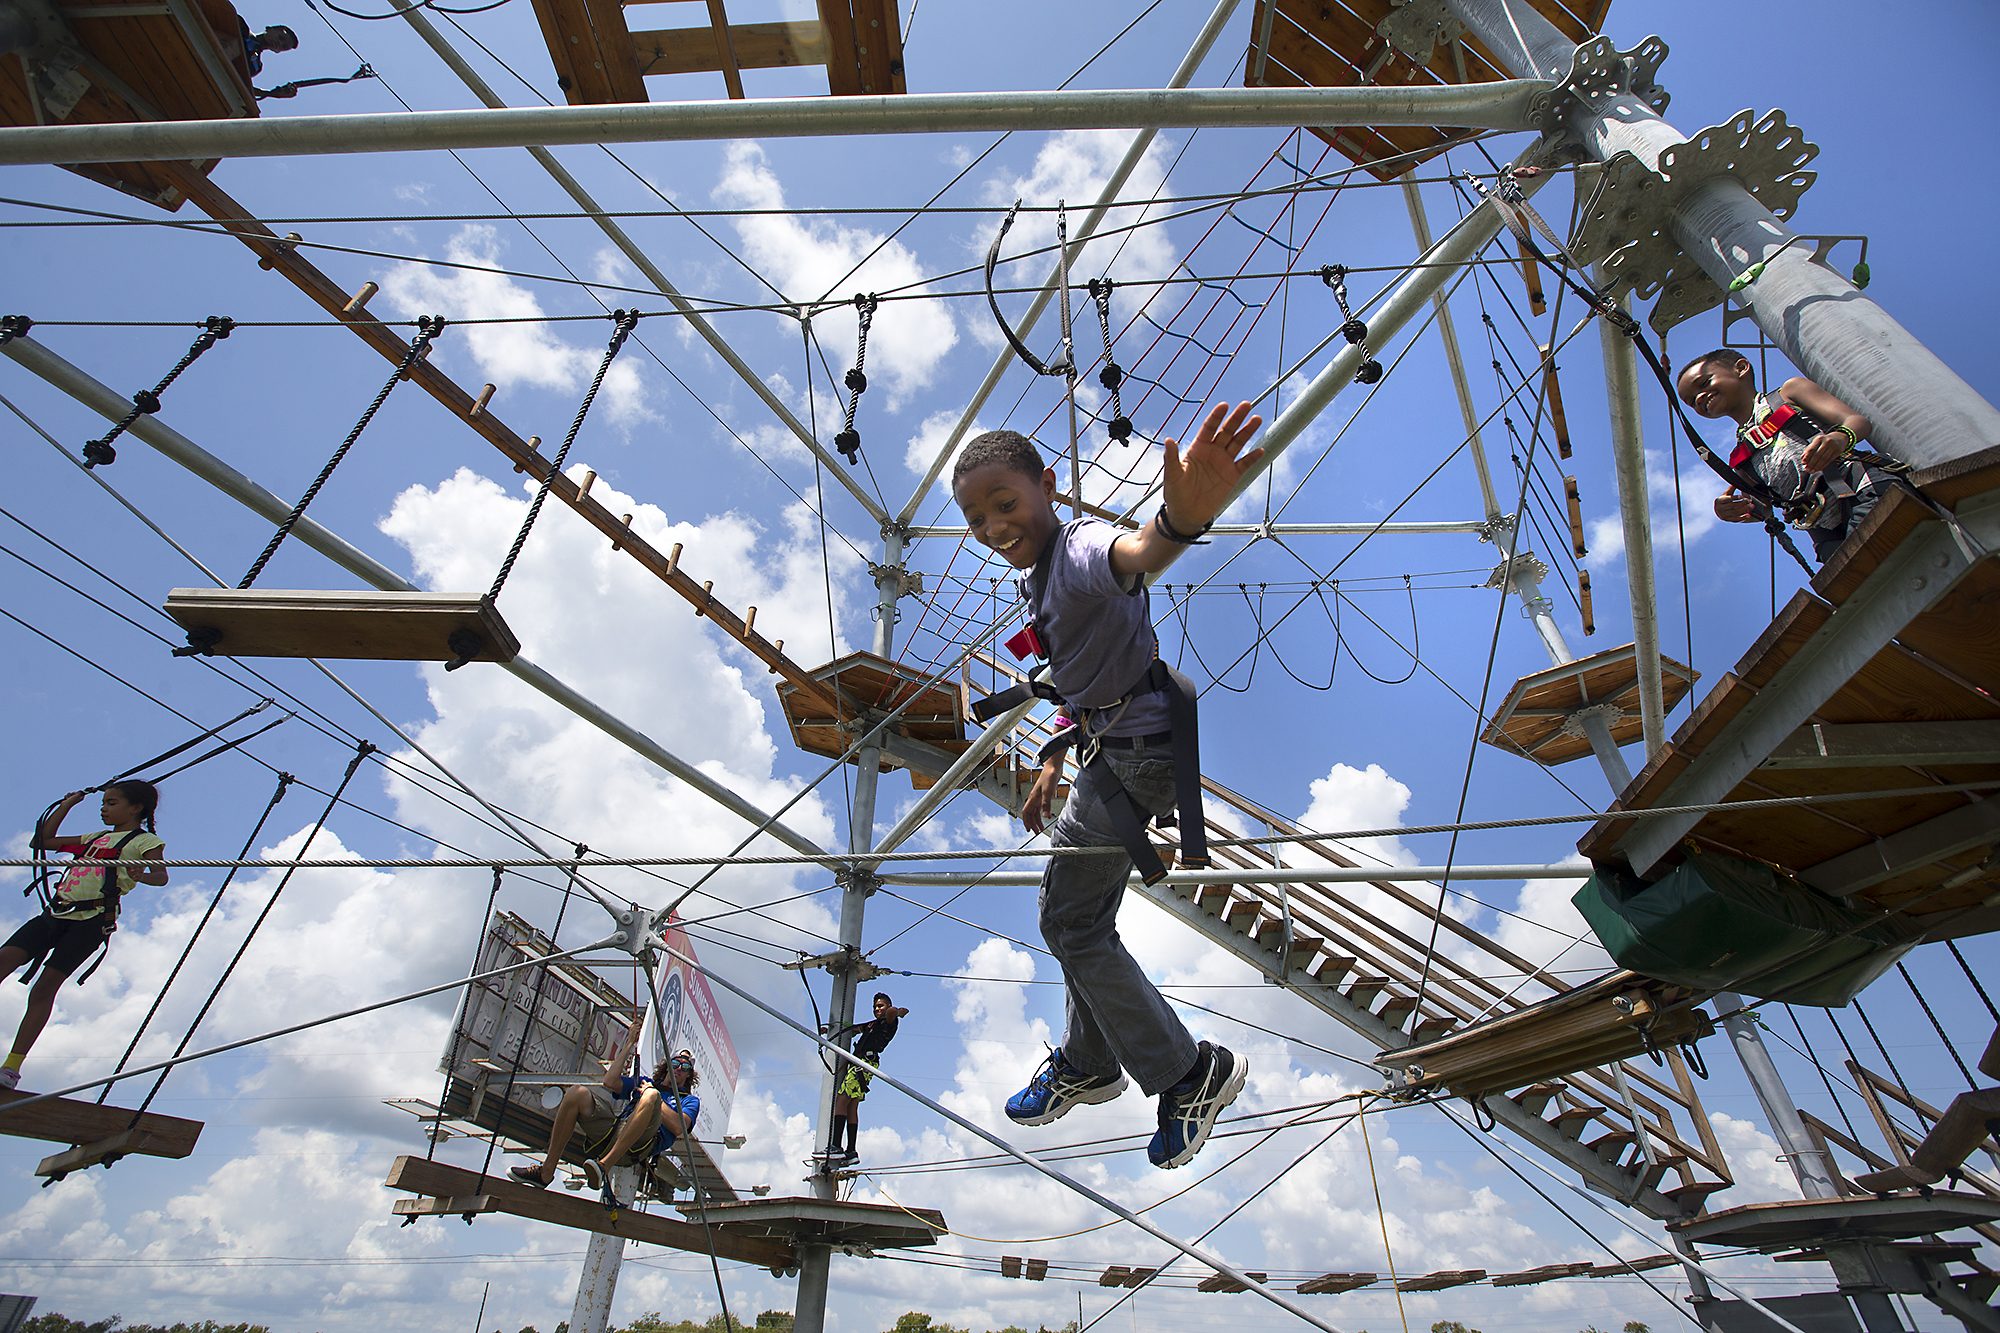 Ropes course offers adventurers a 